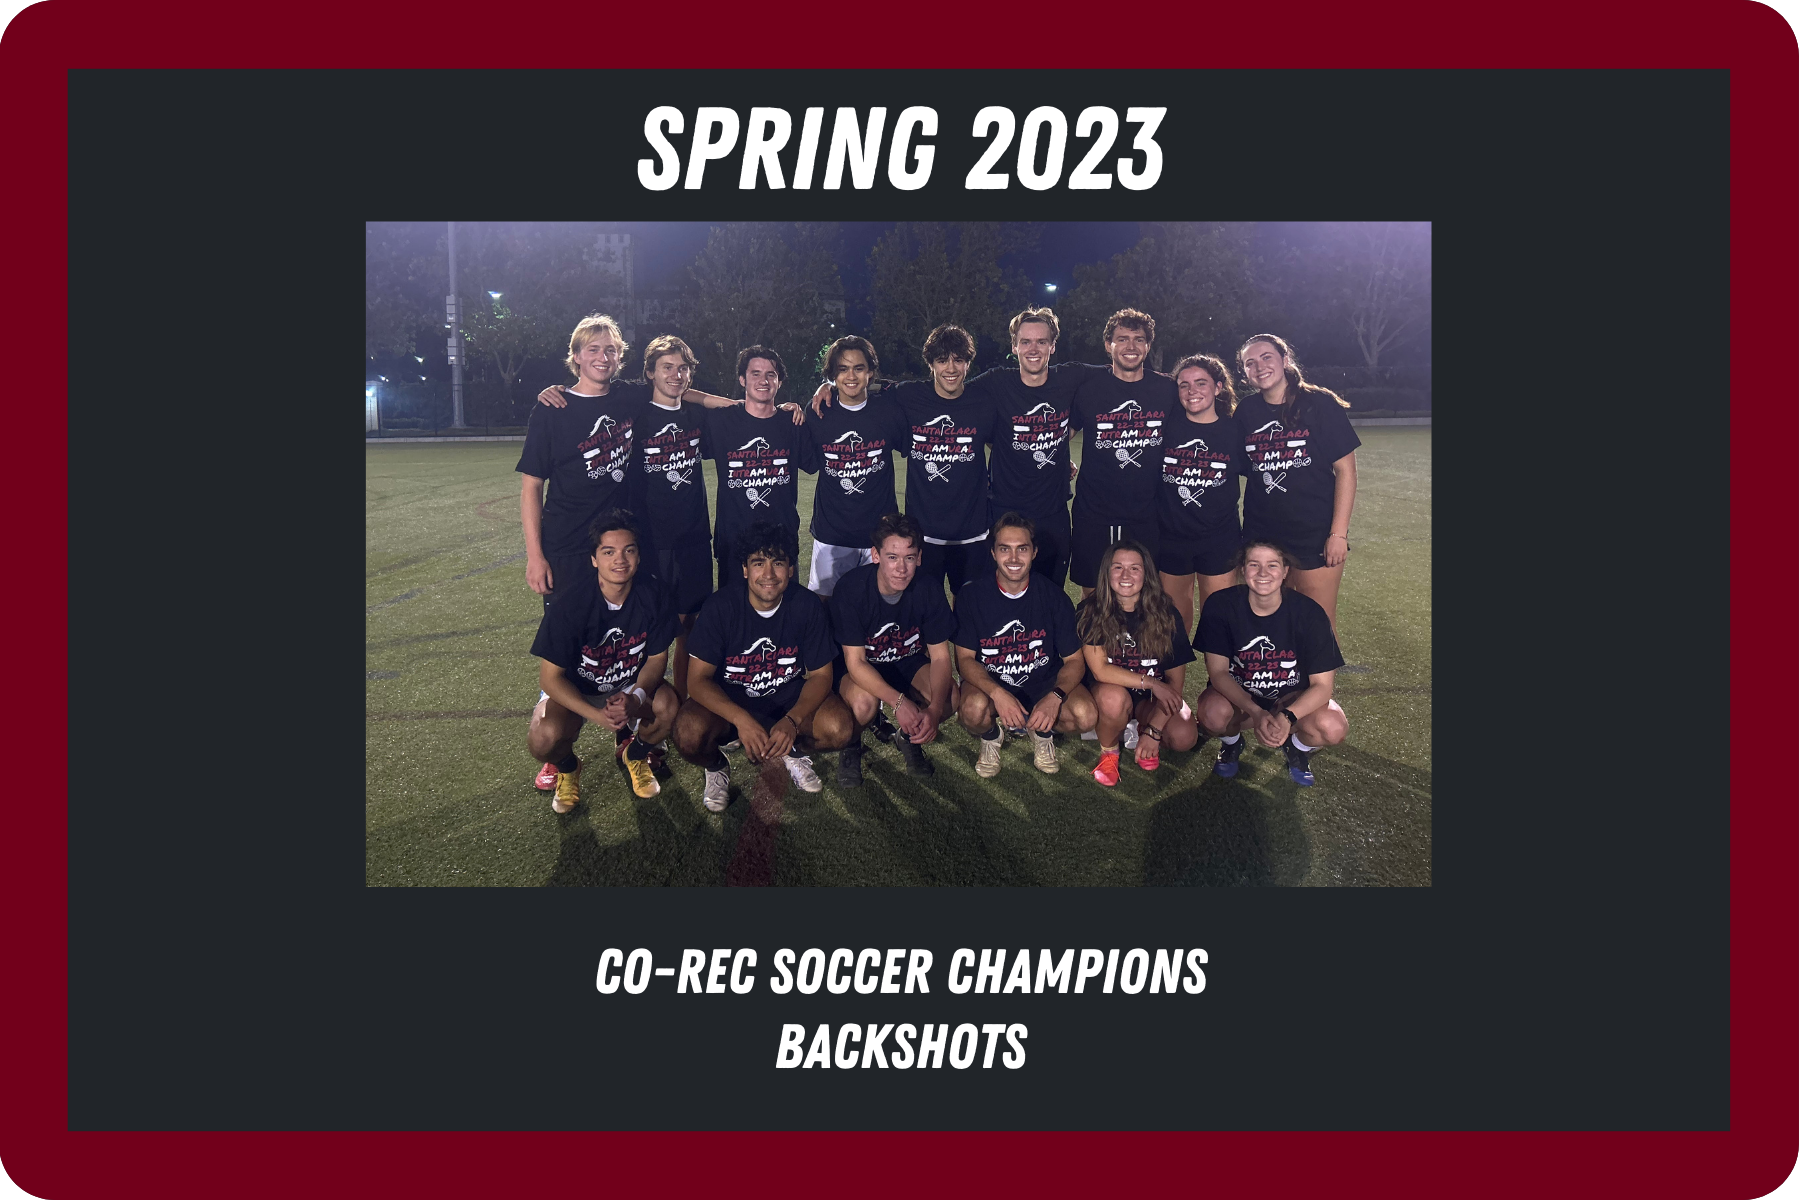 Image of the winning Co-Rec Soccer team, the backshots. They are posing with their intramural champion tshirts.